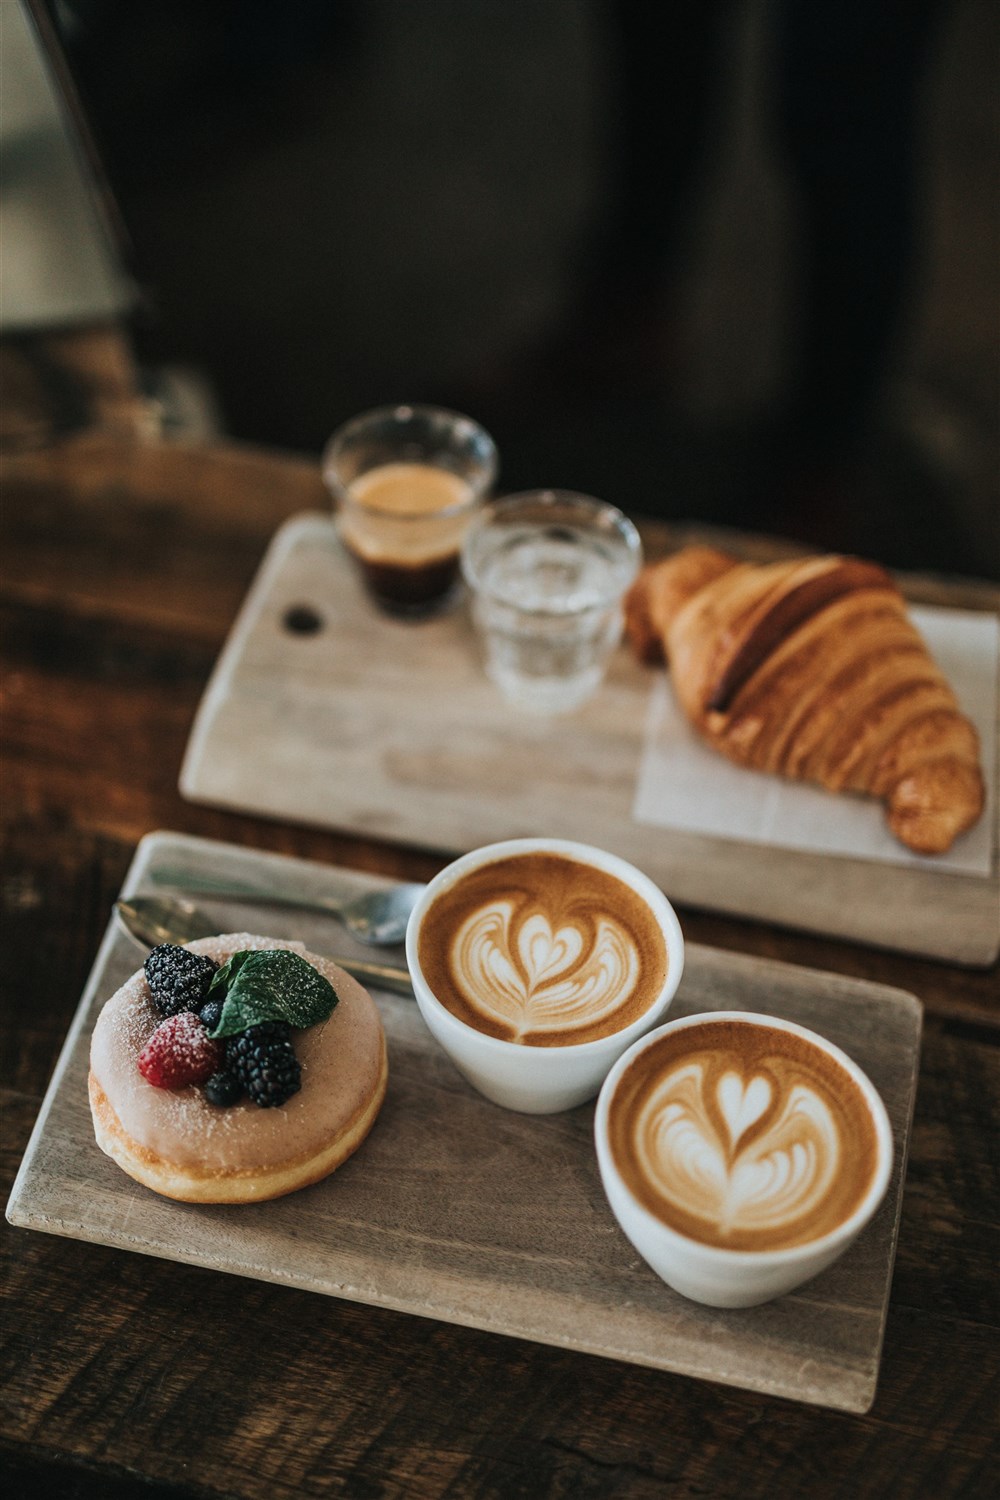  The coffee scene in South Lake Tahoe and Stateline is excellent and diverse, with several small-batch roasters and an array of other good cafes making custom brews for every kind of coffee lover. (There also are all sorts of delicious baked goods.) 